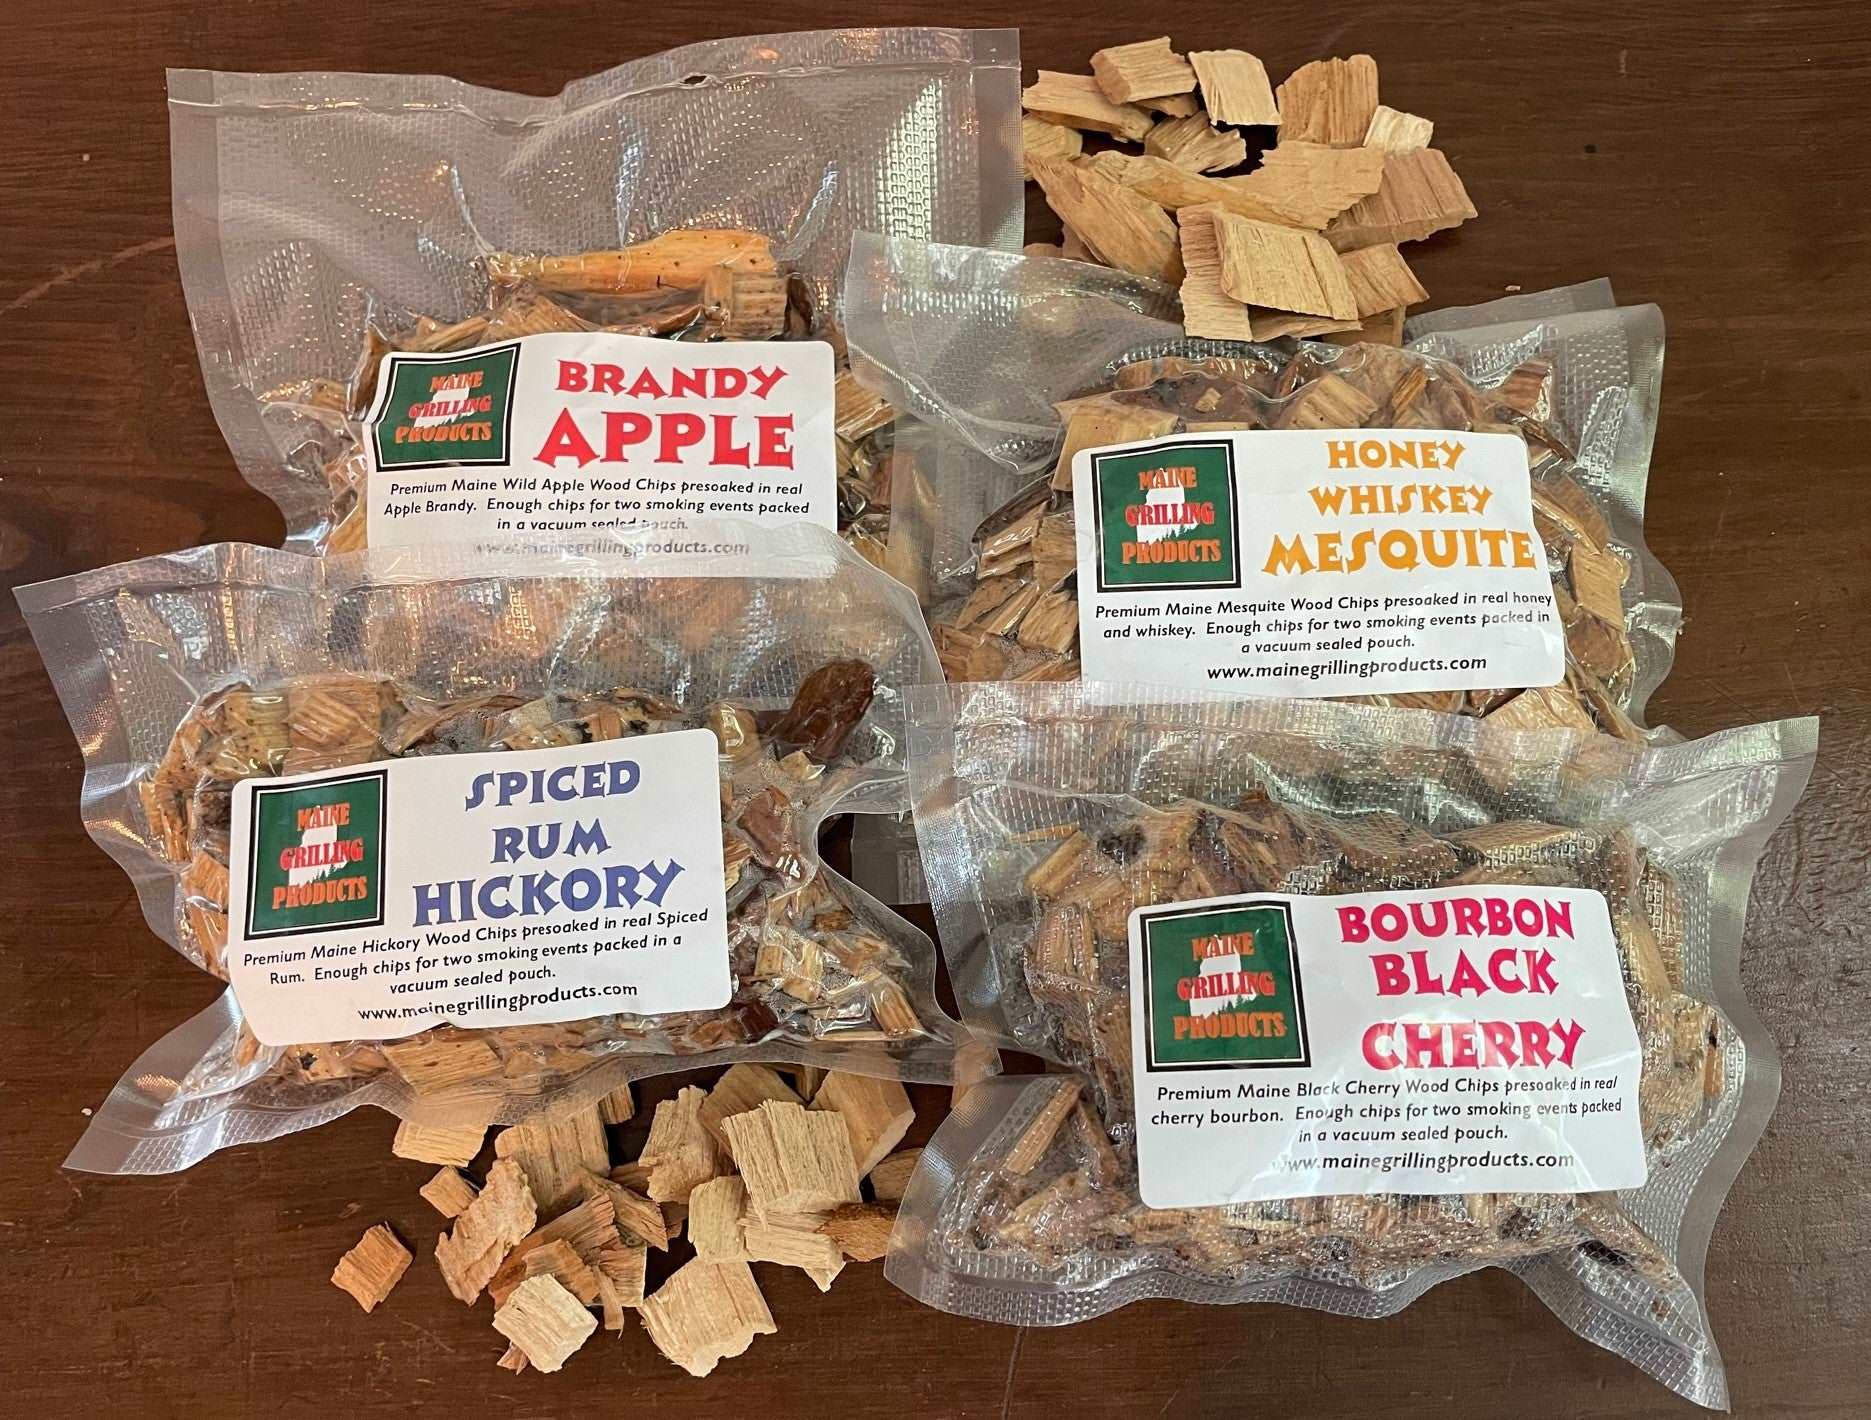 PRE-SOAKED MAINE WOOD CHIPS VARIETY PACK (ONE EACH 6 OZ POUCH) BRANDY APPLE, HONEY WHISKEY MESQUITE, SPICED RUM HICKORY, AND BOURBON BLACK CHERRY